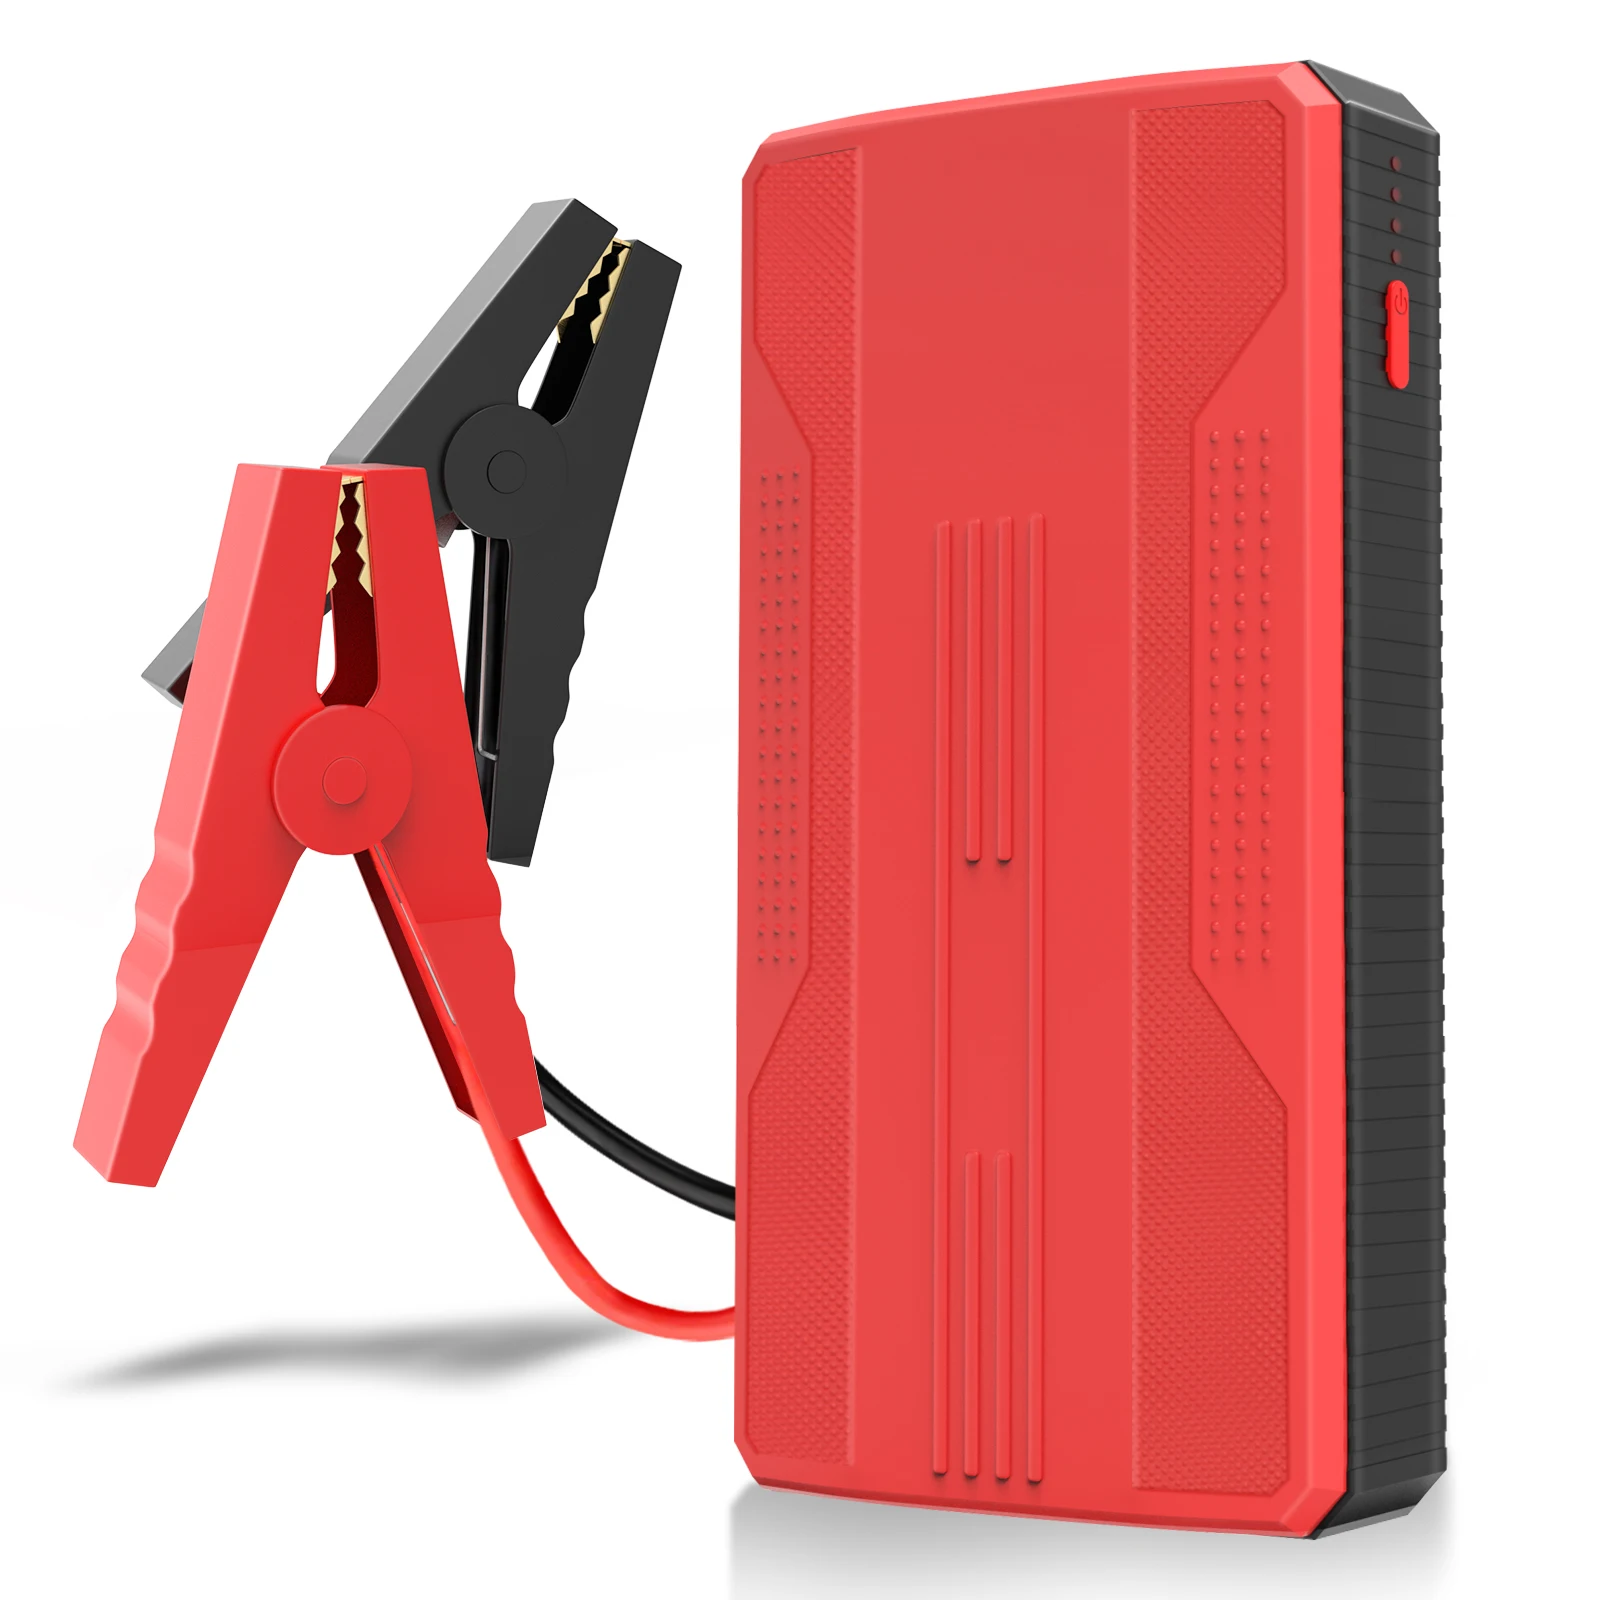 battery jump starter 20000mah Car Jump Starter Portable Car Battery Booster Charger 12V Starting Device Petrol Diesel Car Emergency Booster noco boost plus gb40 Jump Starters